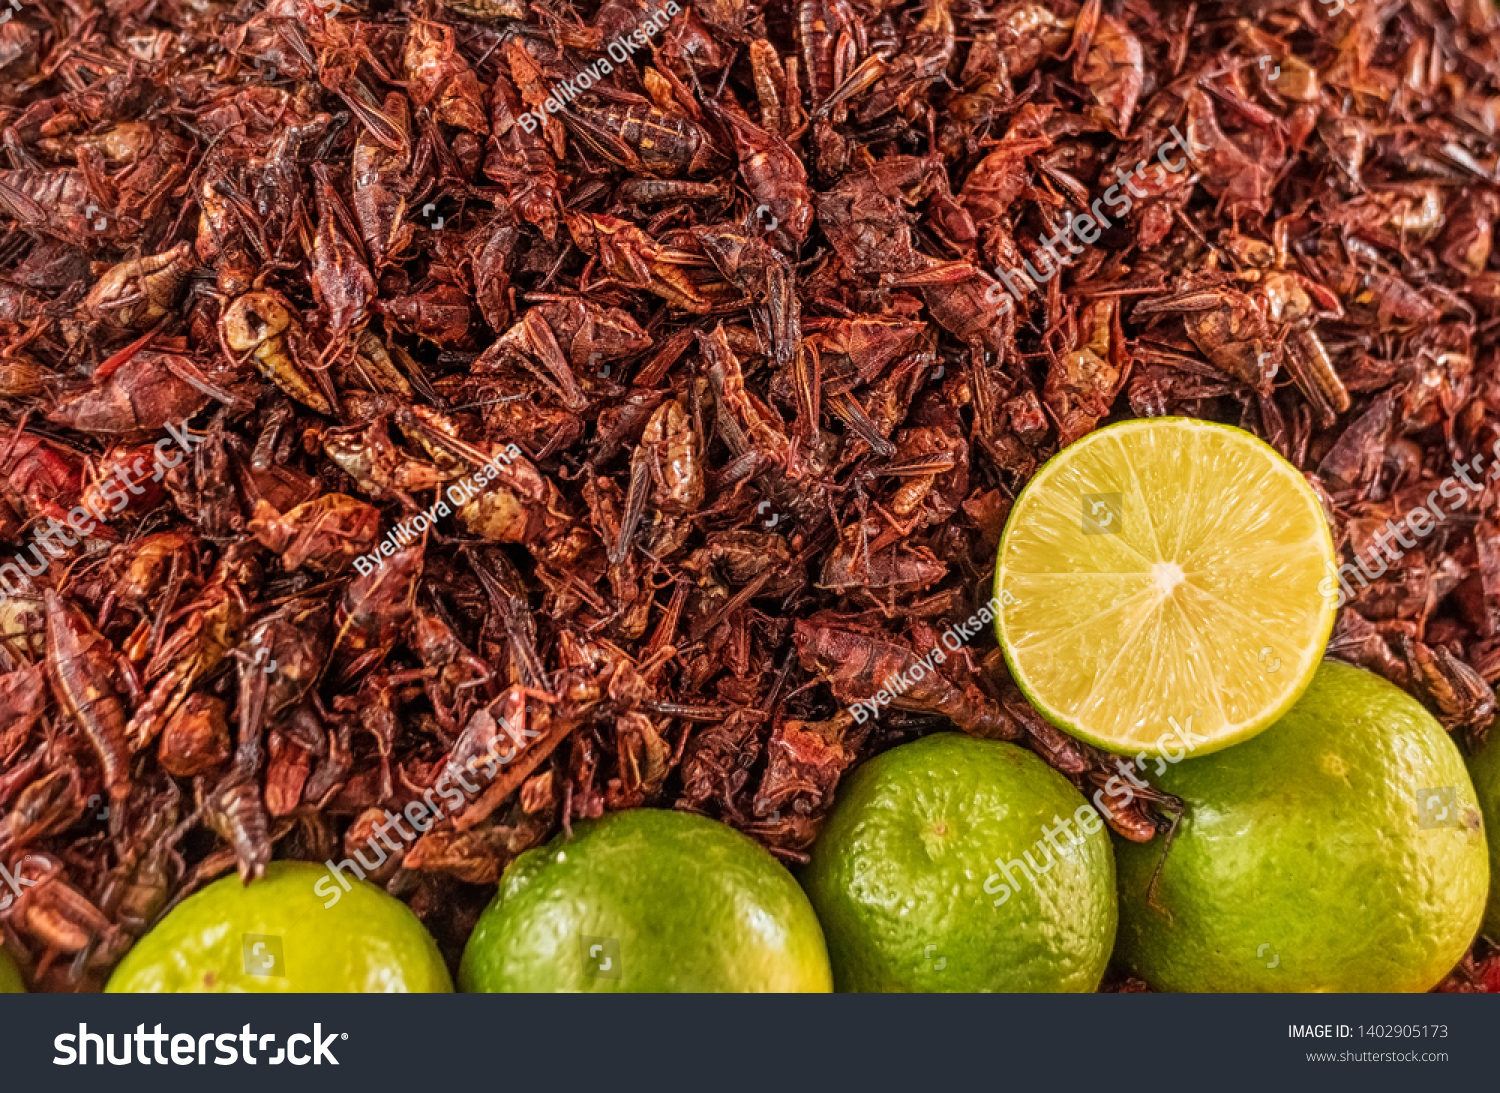 Fried grasshoppers (chapolenas) and lemon at a market, Mexico #1402905173